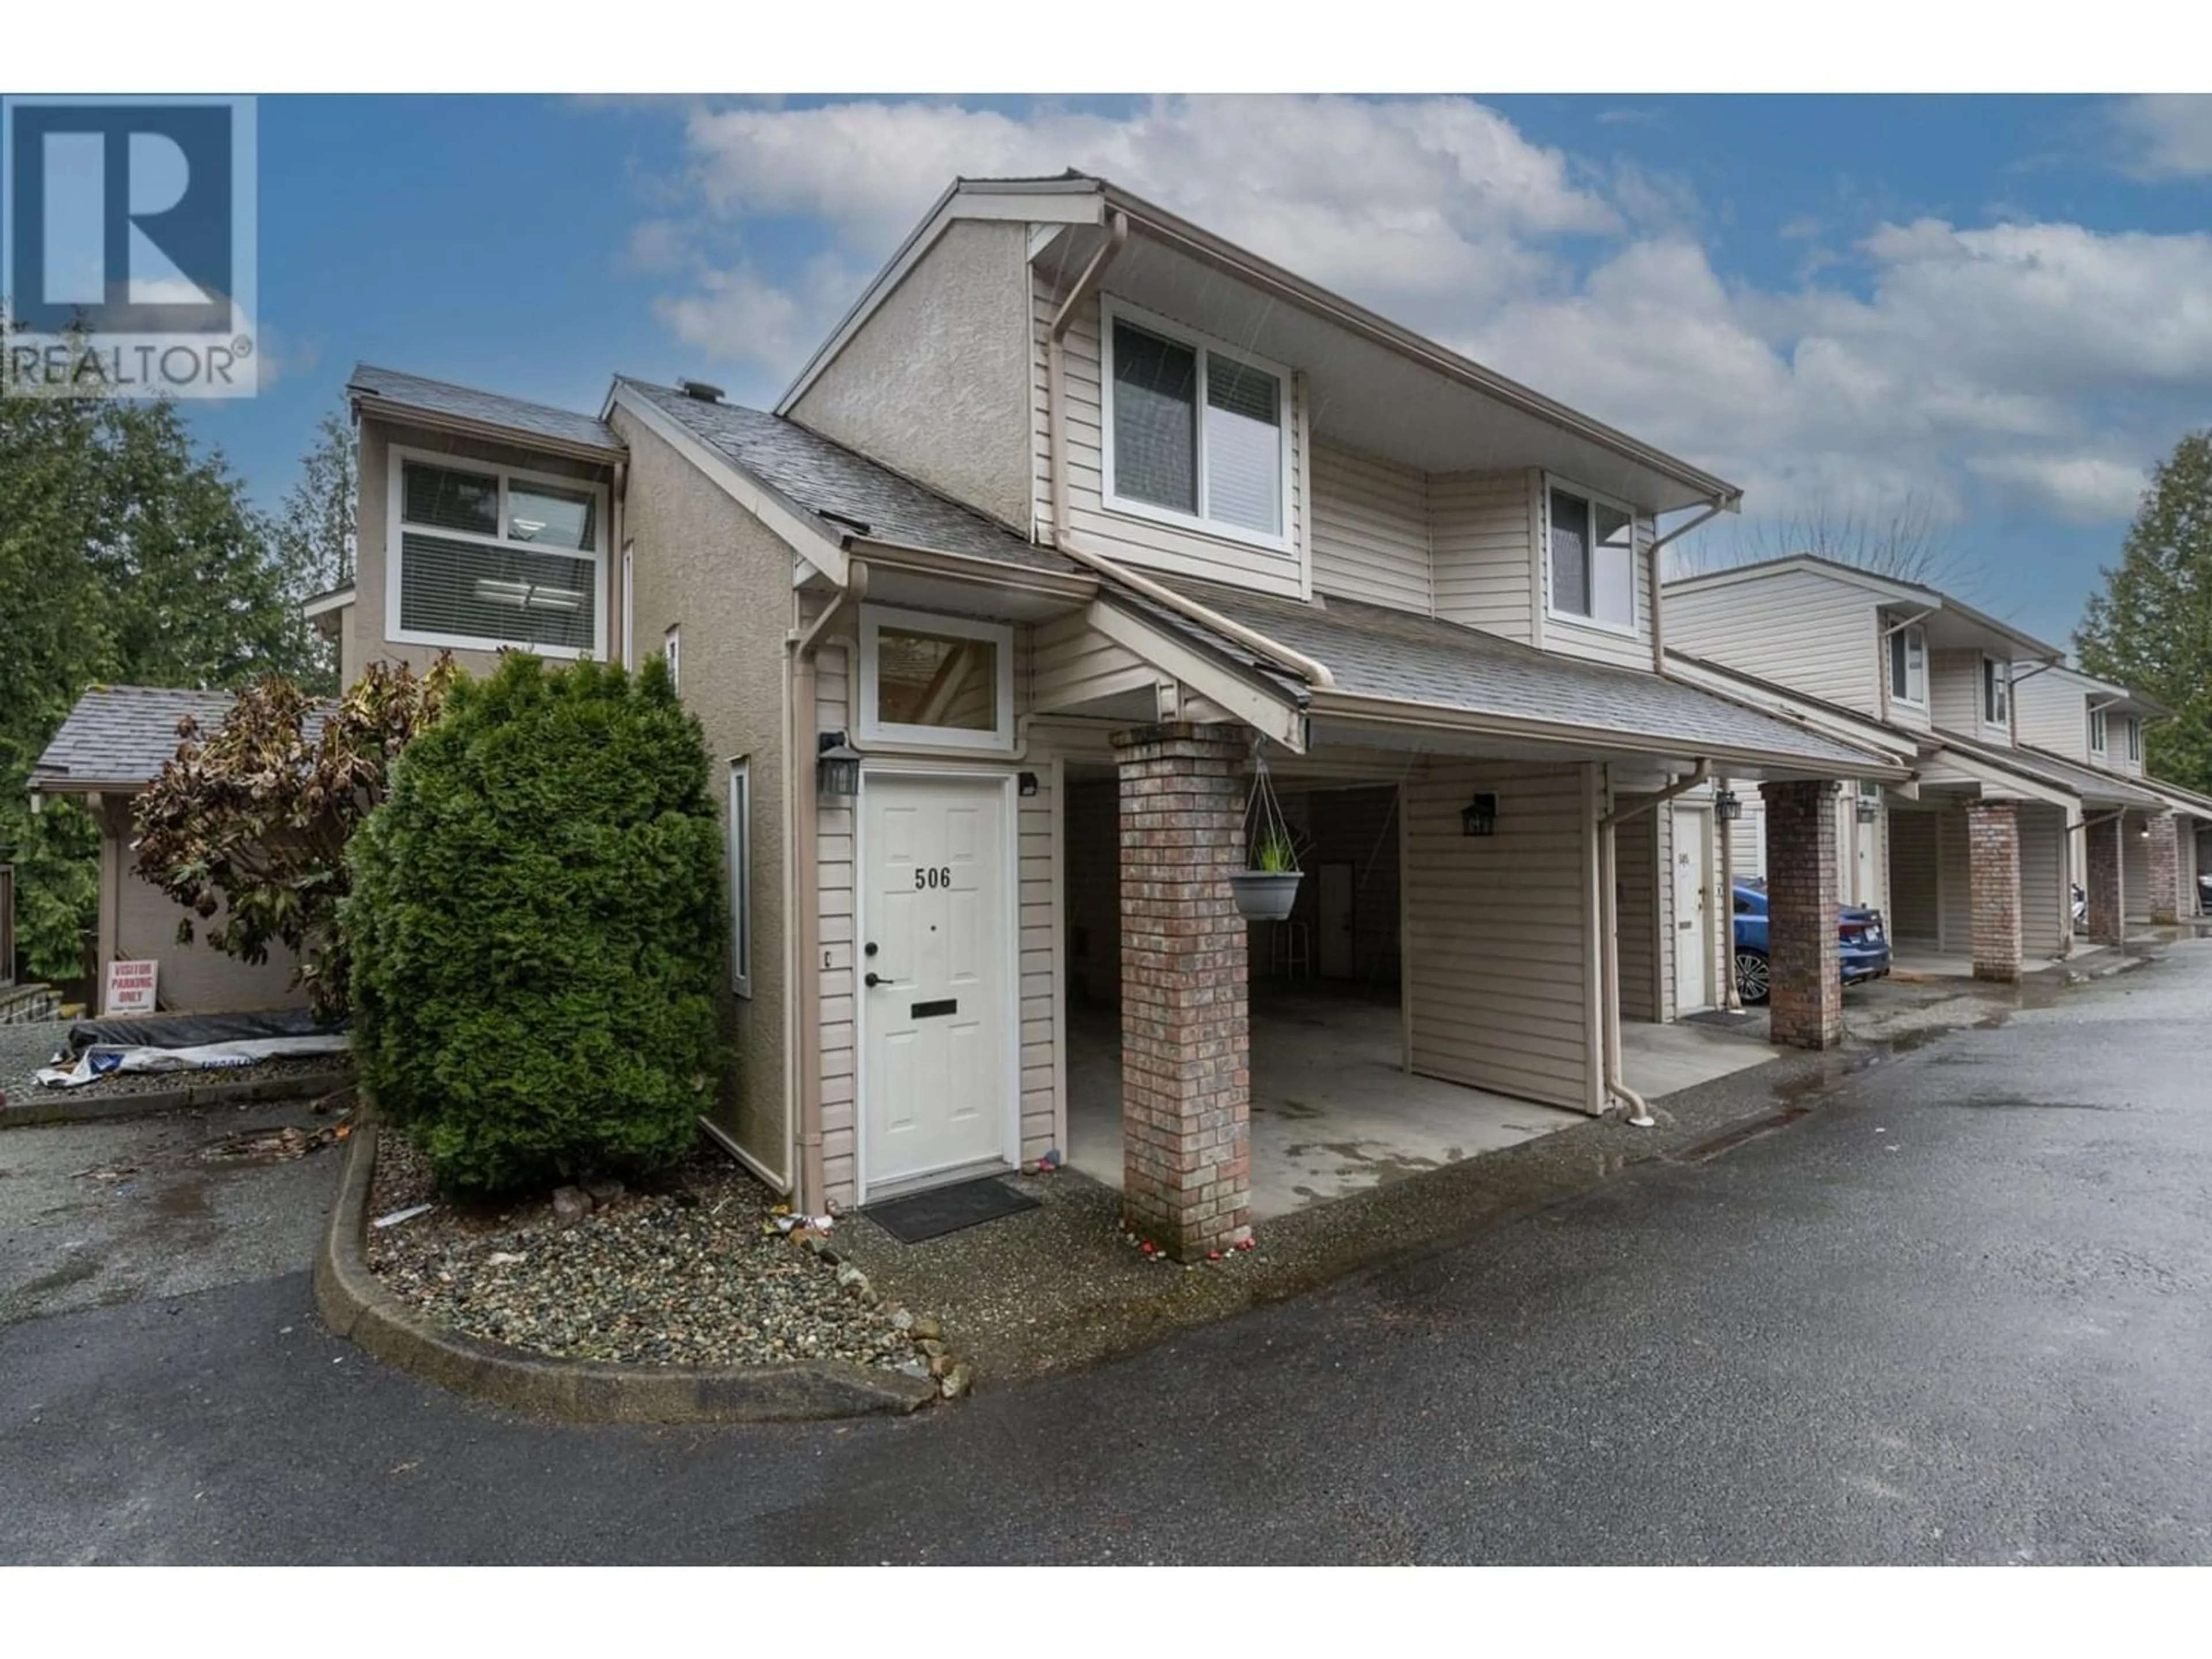 A pic from exterior of the house or condo for 506 11726 225 STREET, Maple Ridge British Columbia V2X6E4